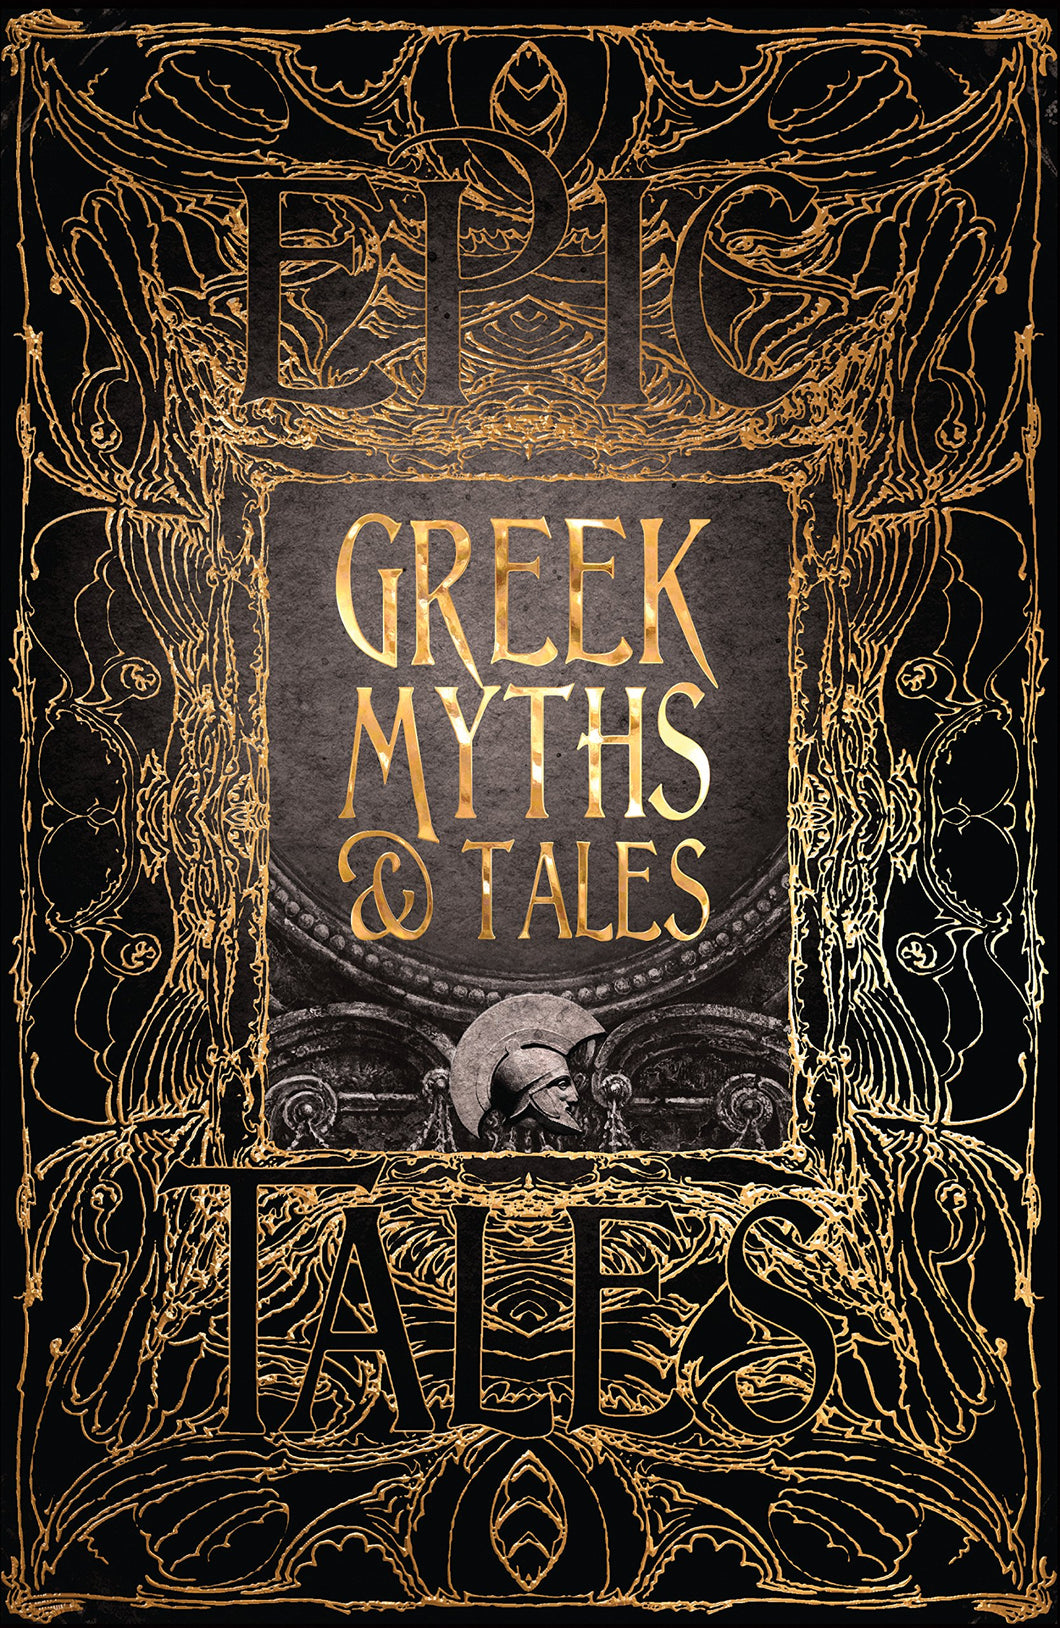 GOTHIC FANTASY SERIES:Greek Myths & Tales Epic Stories